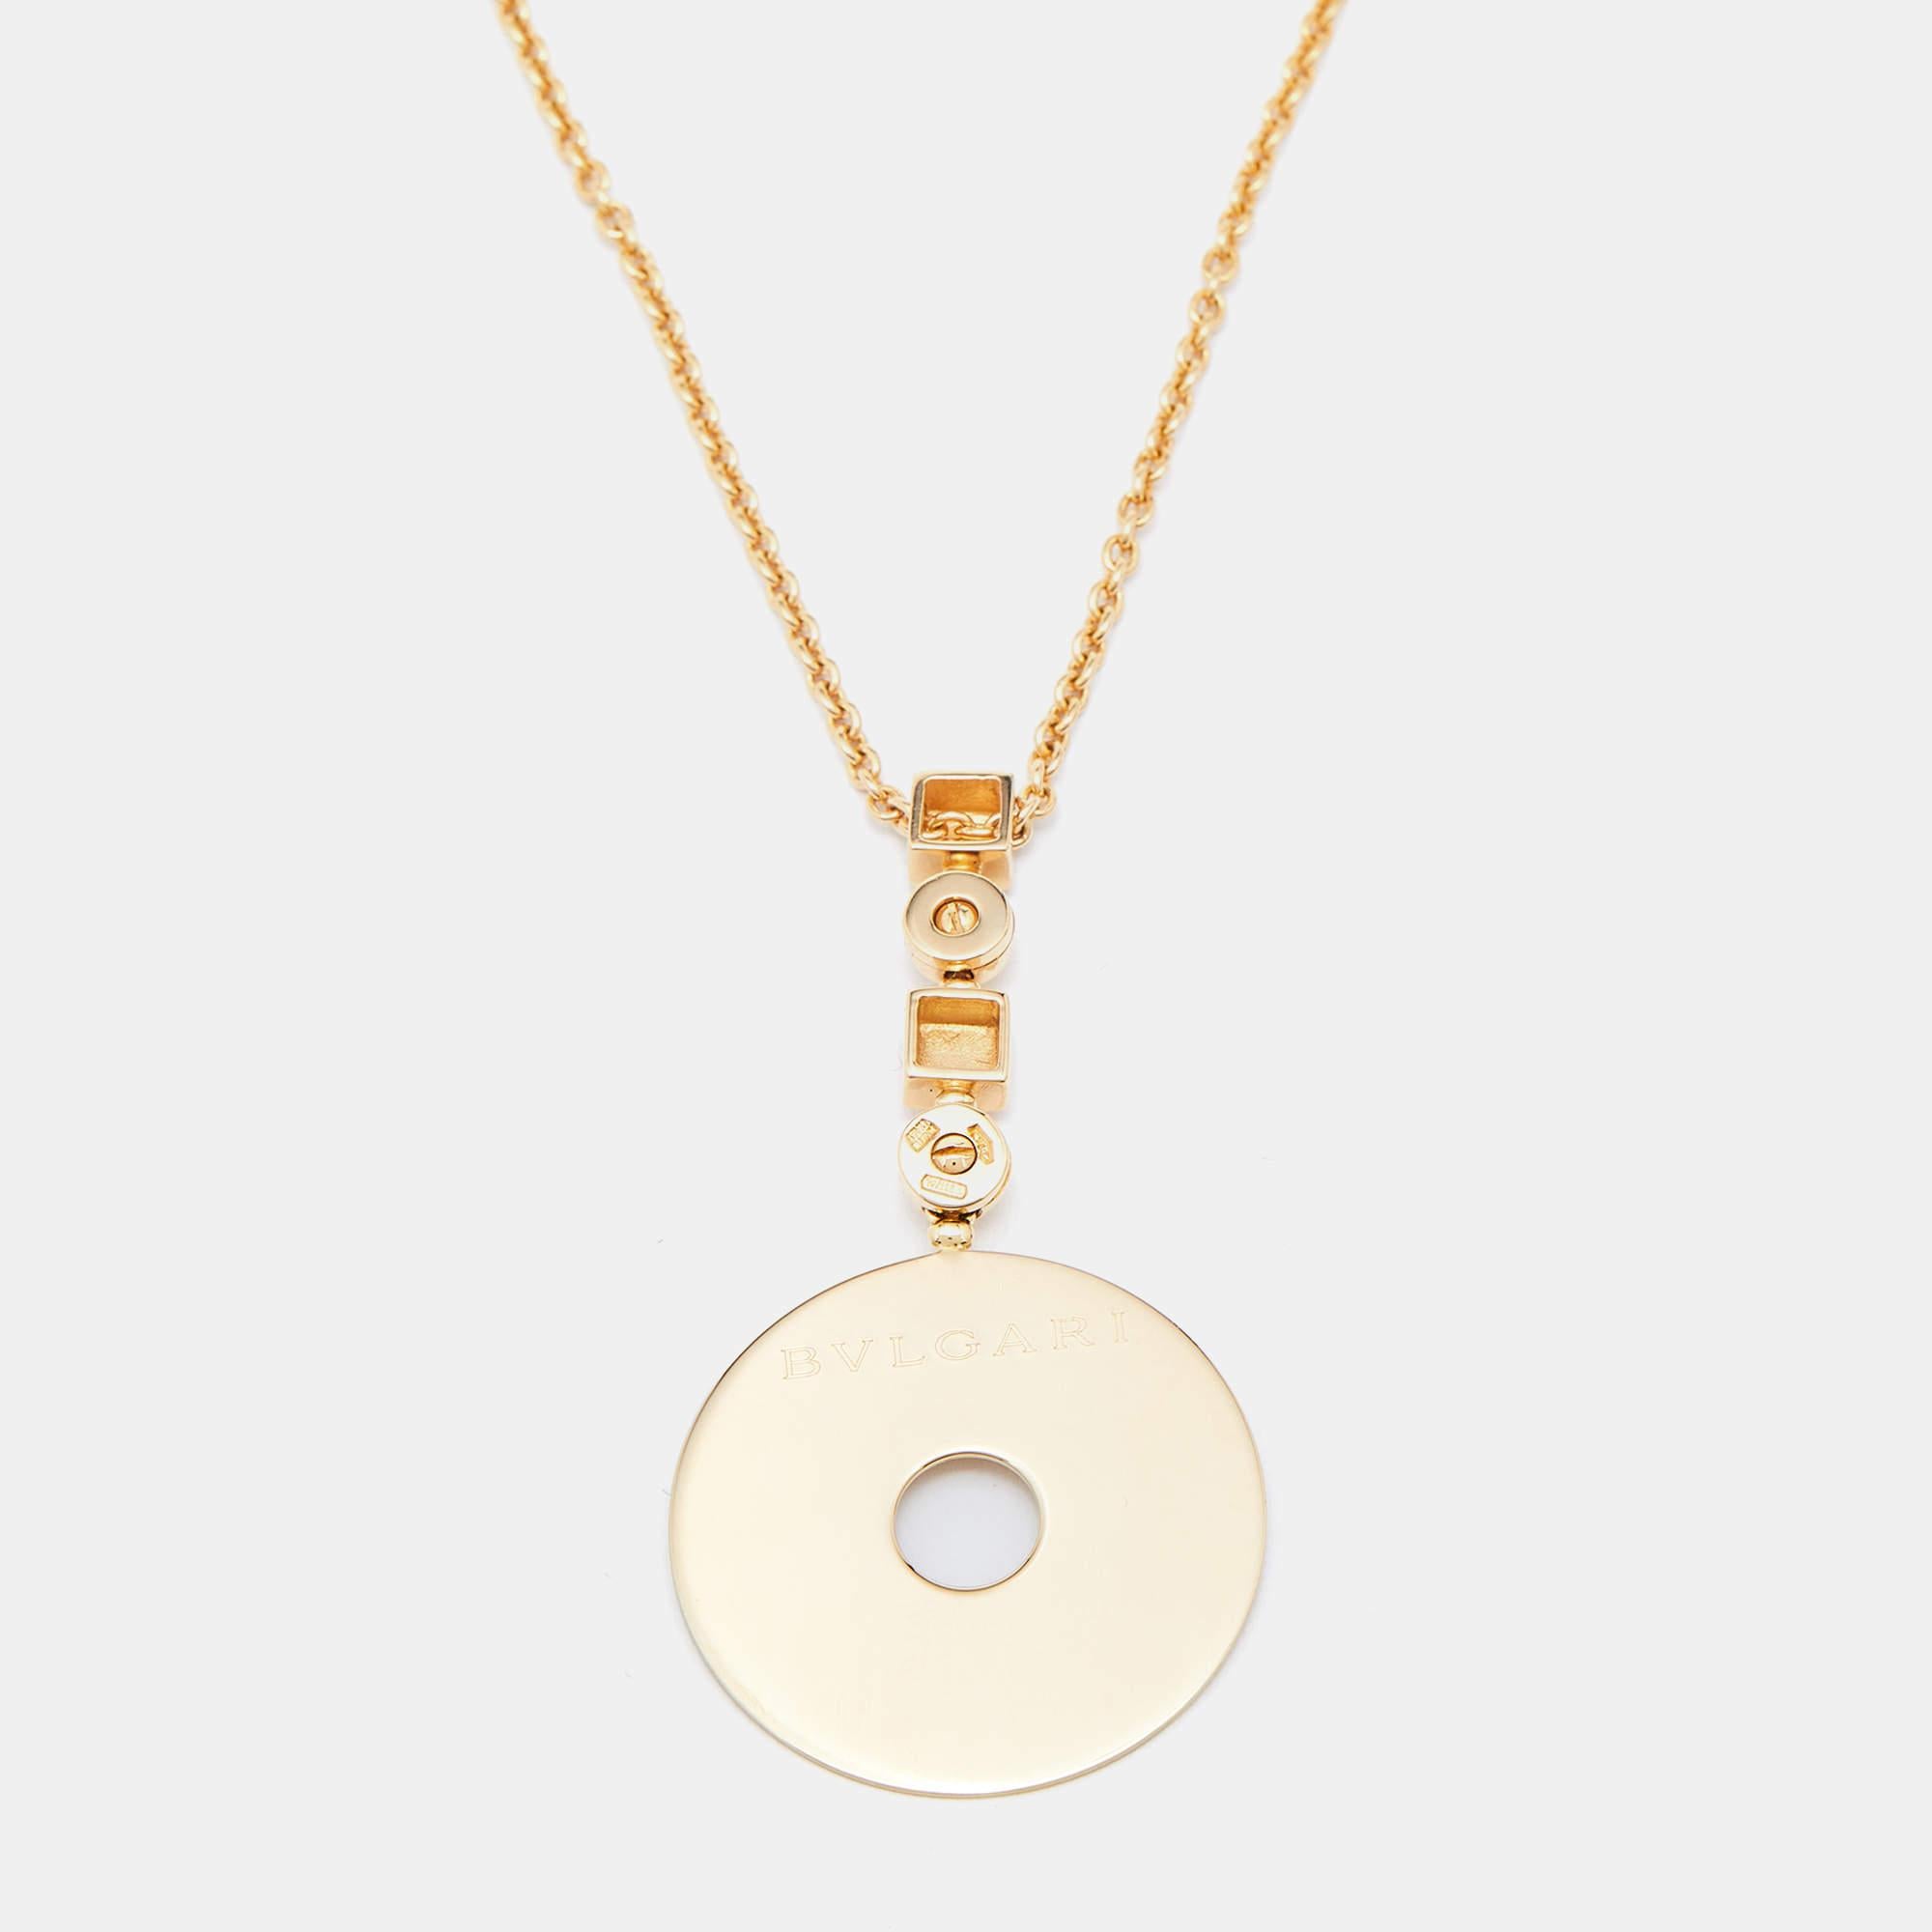 This necklace set comes with a matching pair of earrings. The pieces, designed by Bvlgari, are made of 18k yellow gold, and the design is simple, elegant, and timeless.

Includes: Original Case

